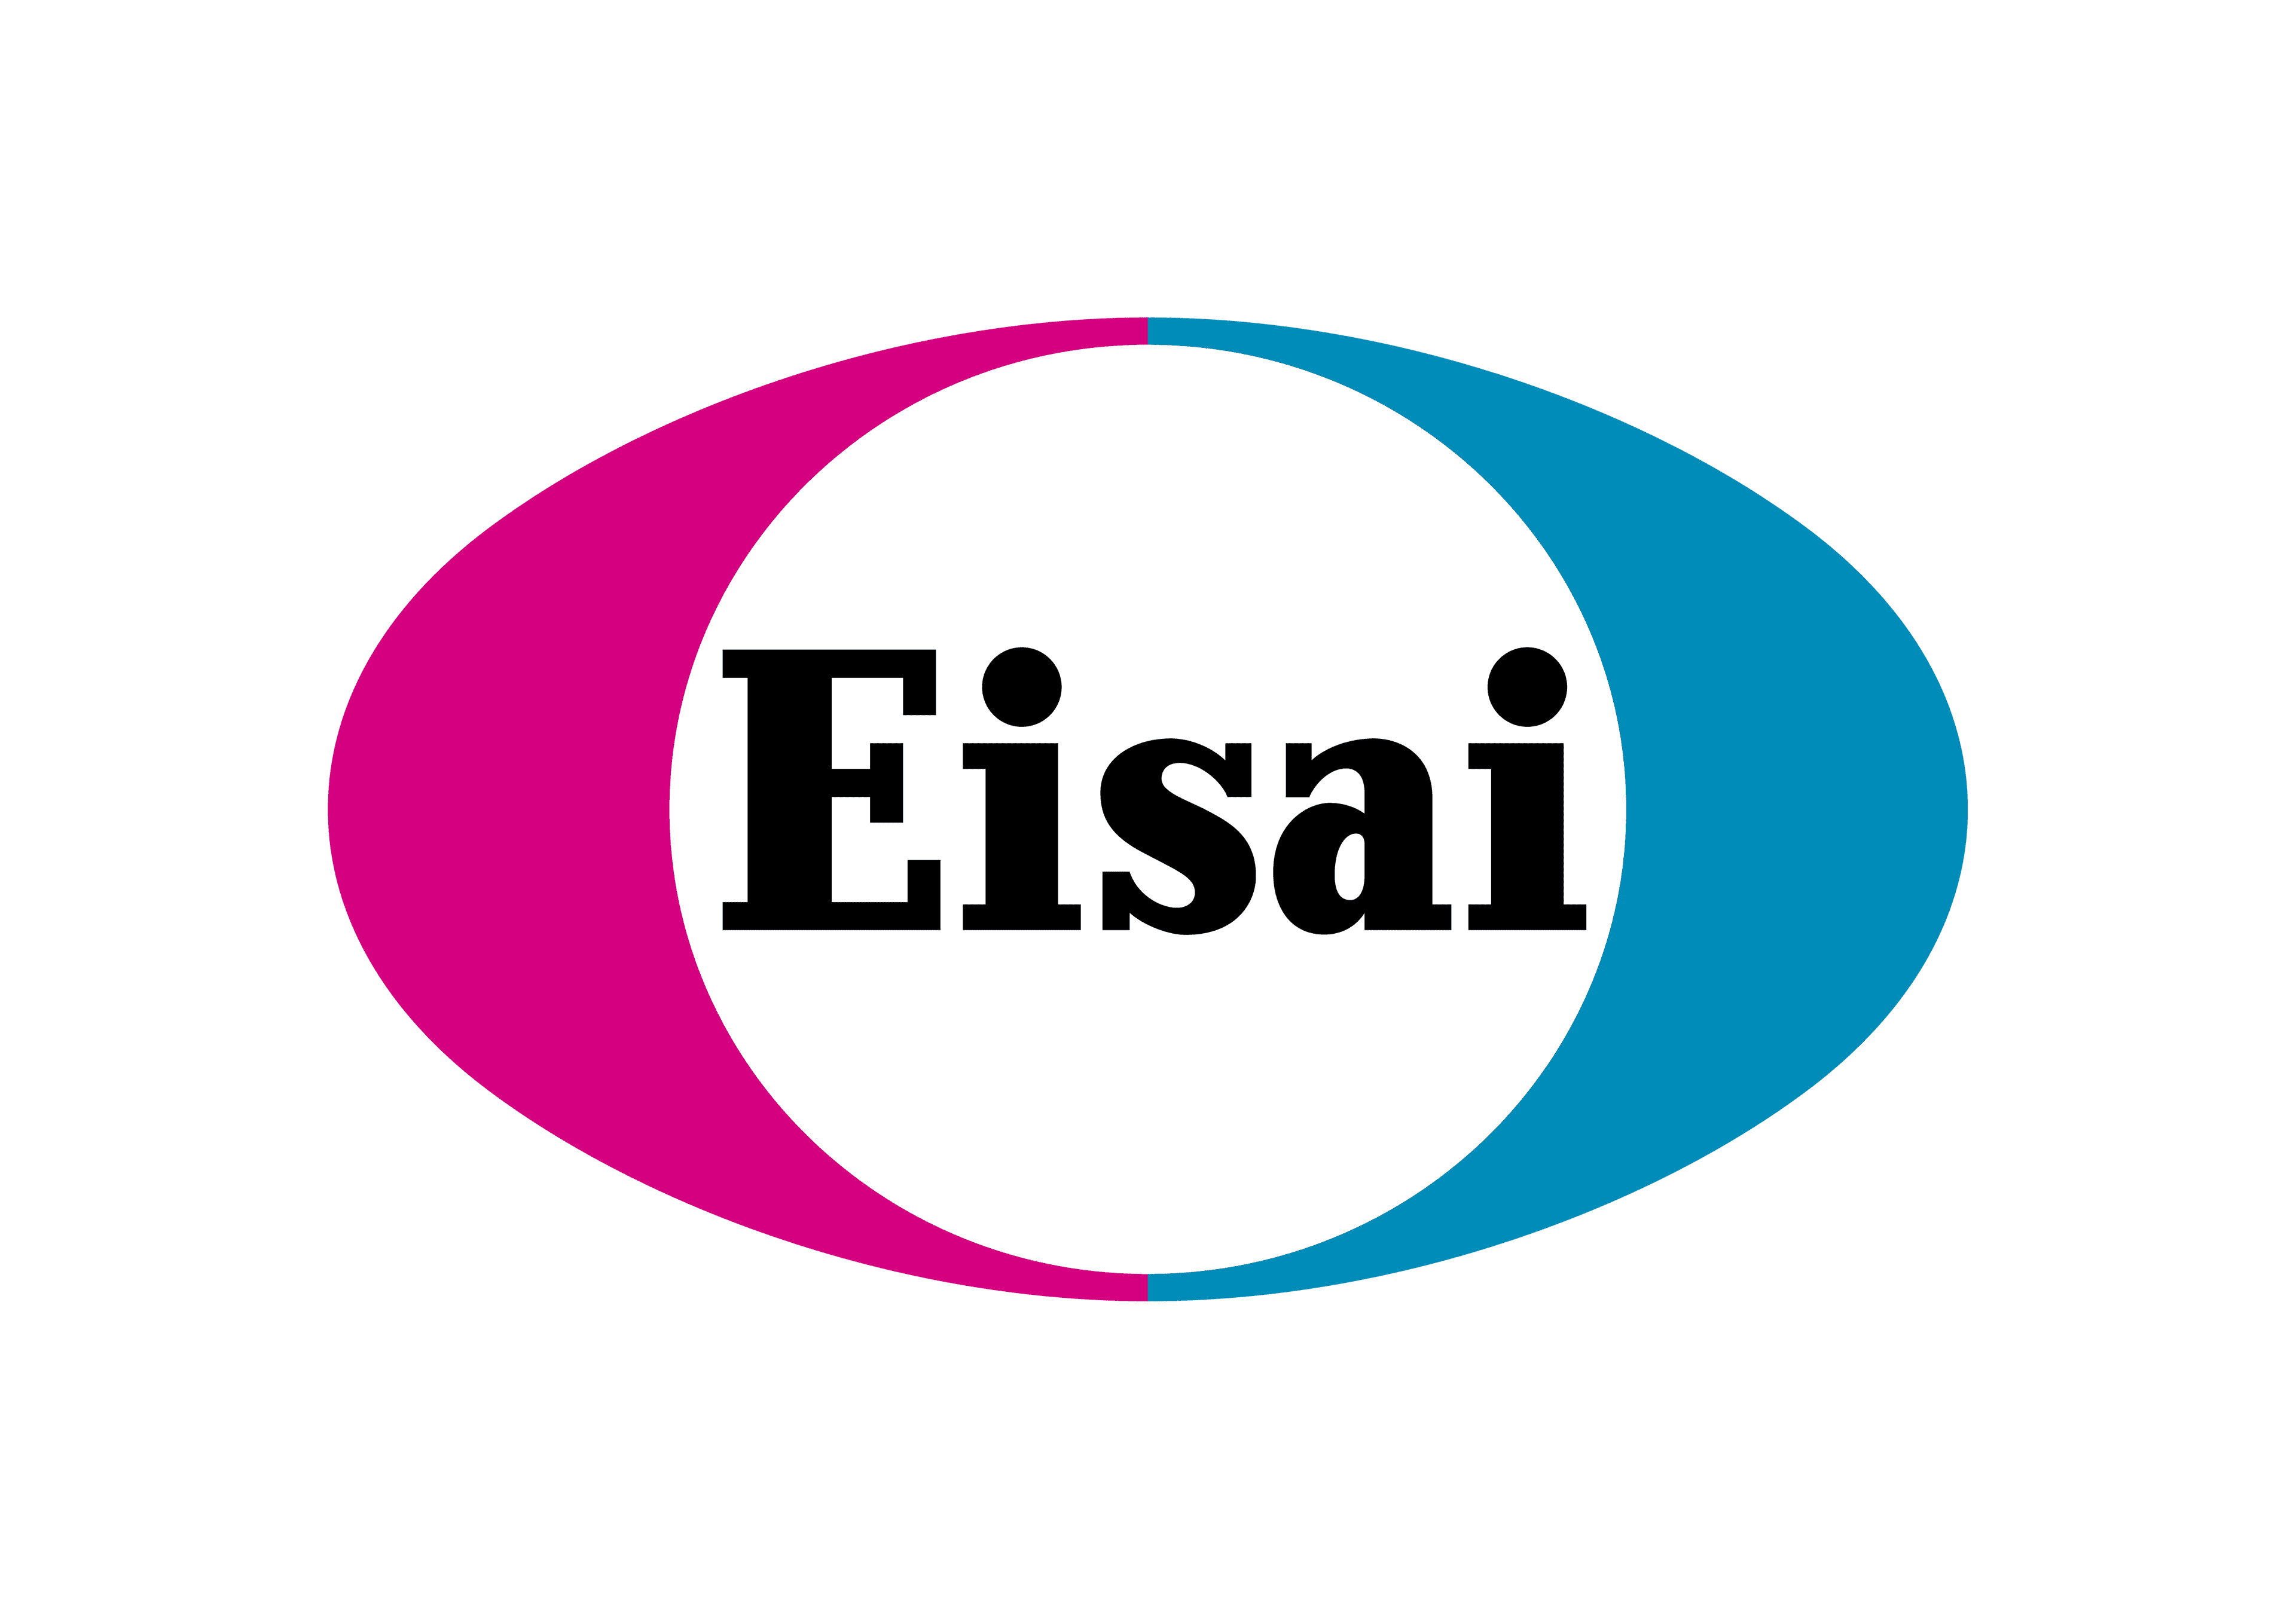 Latest Eisai employment/hiring with high salary & attractive benefits